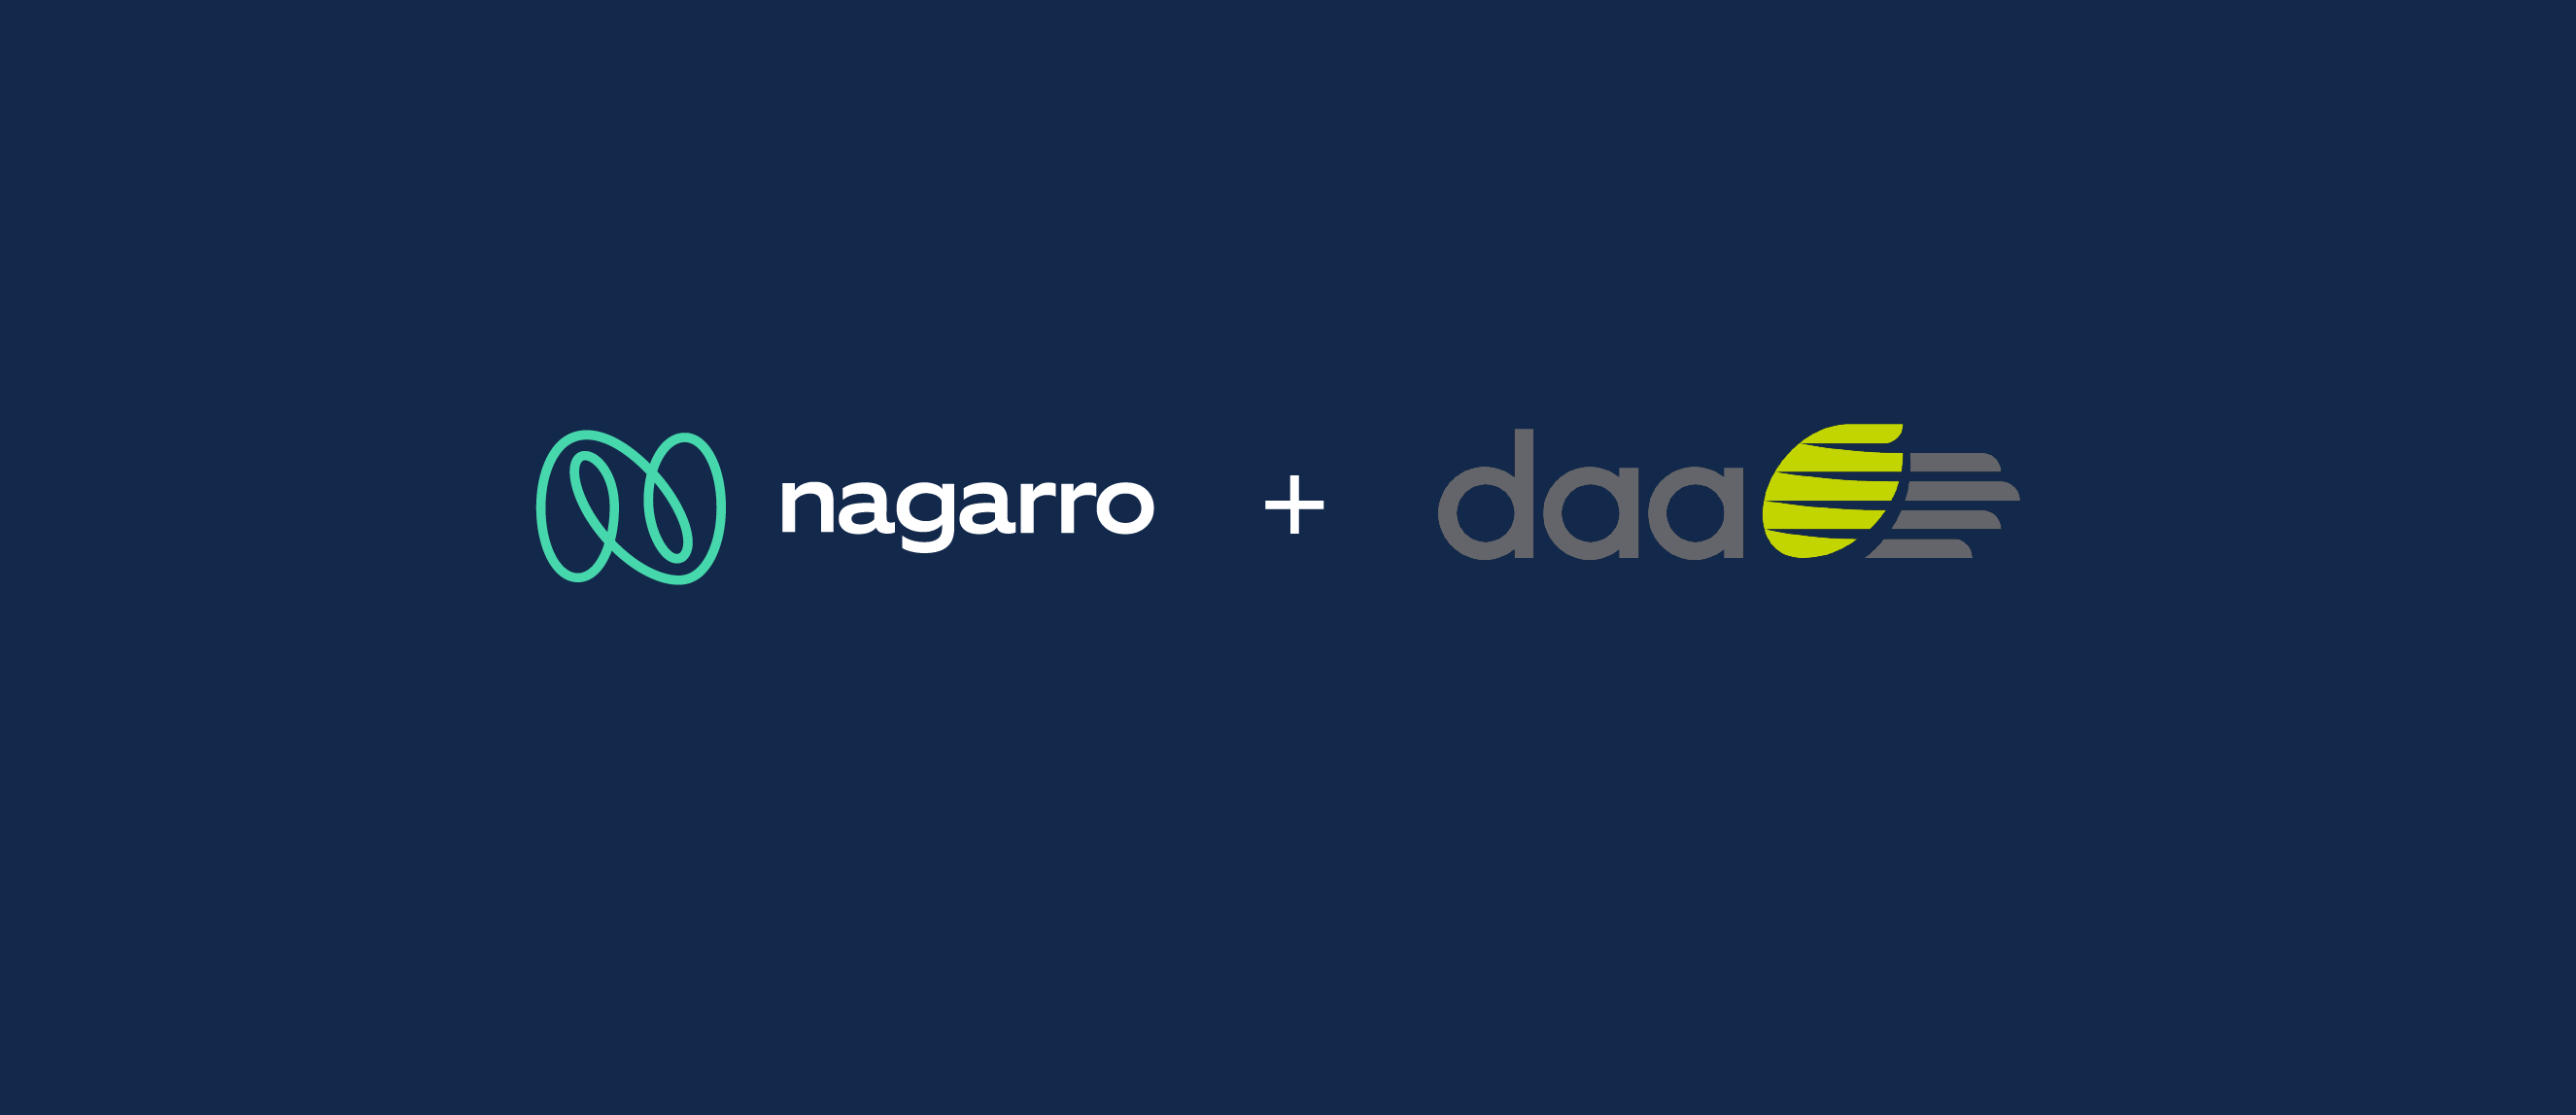 Nagarro links up with daa to enable a data-driven culture